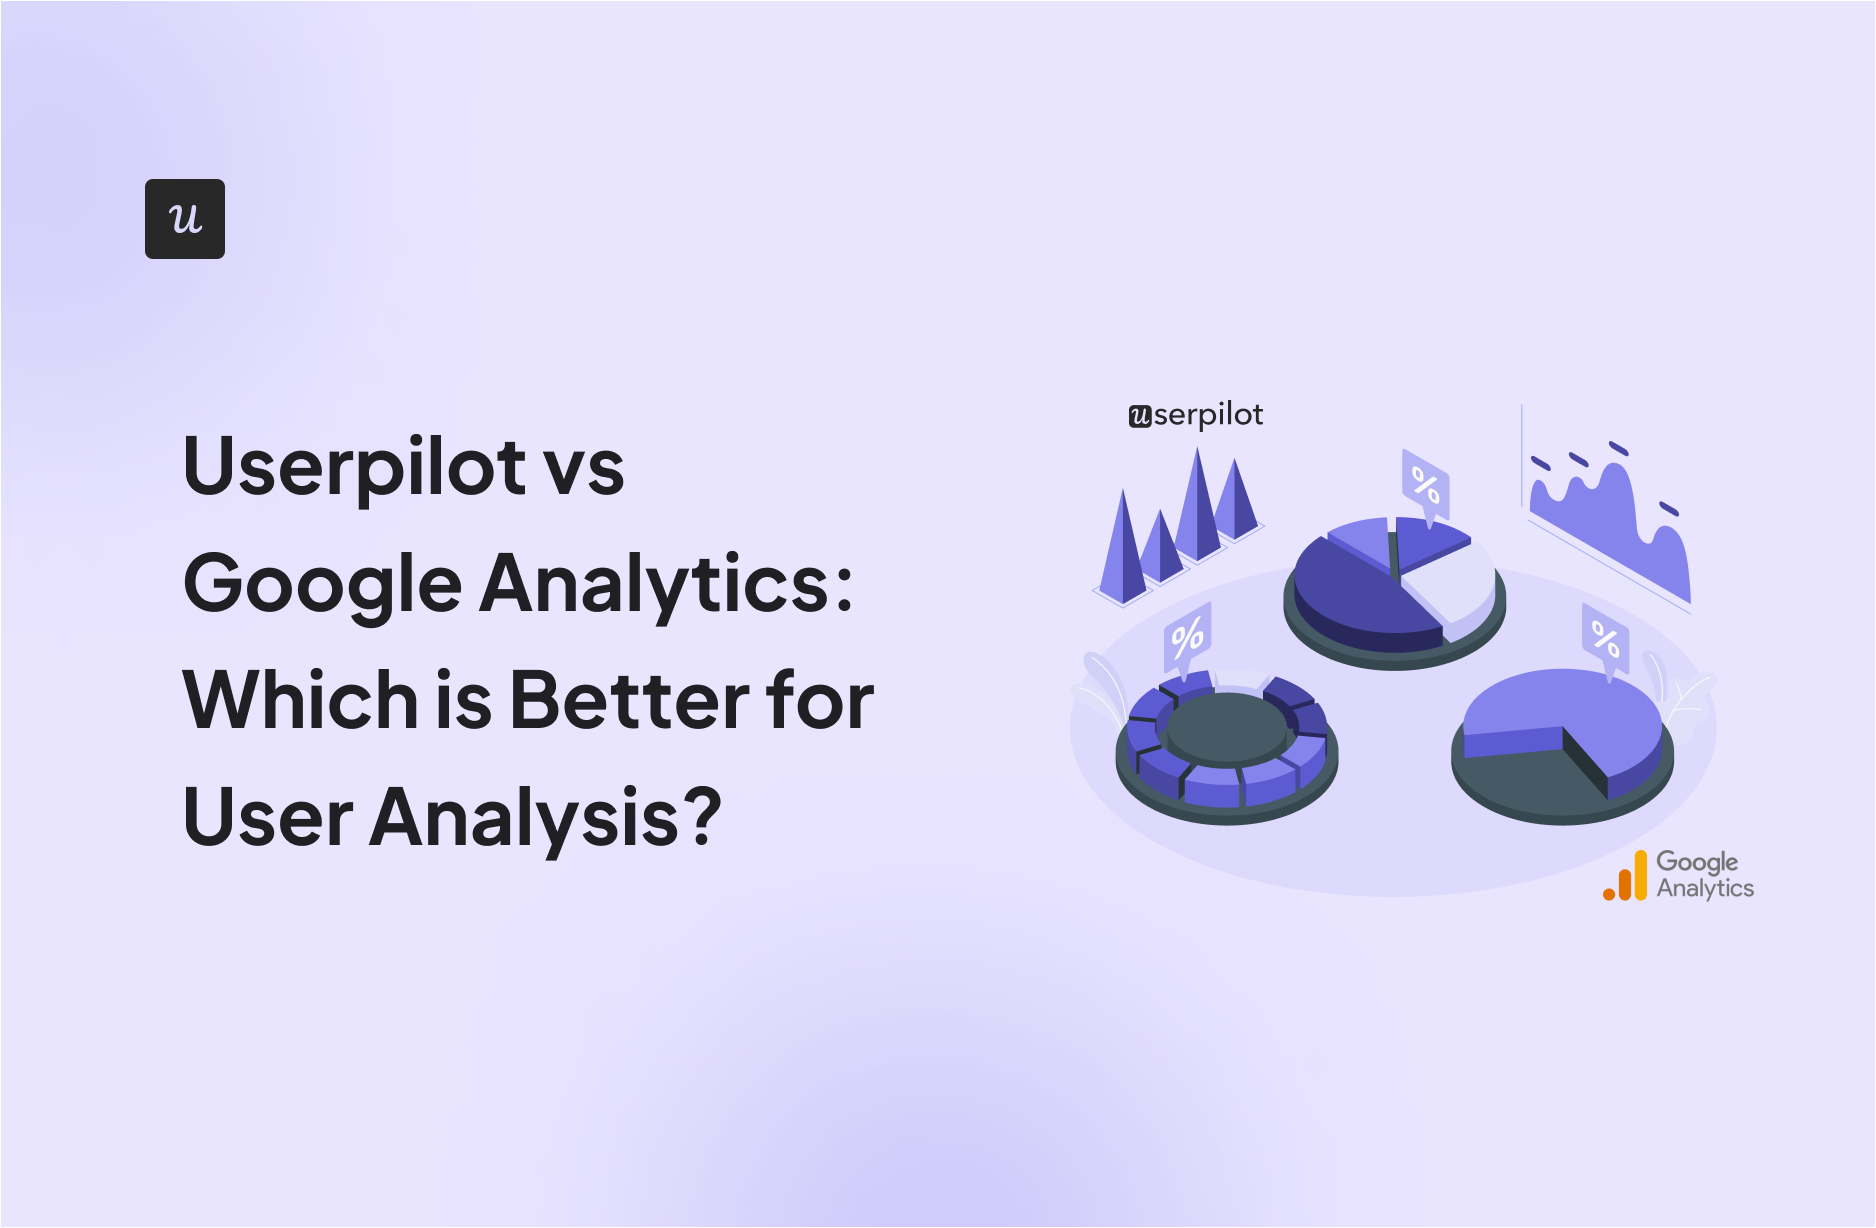 Userpilot vs Google Analytics: Which is Better for User Analysis?